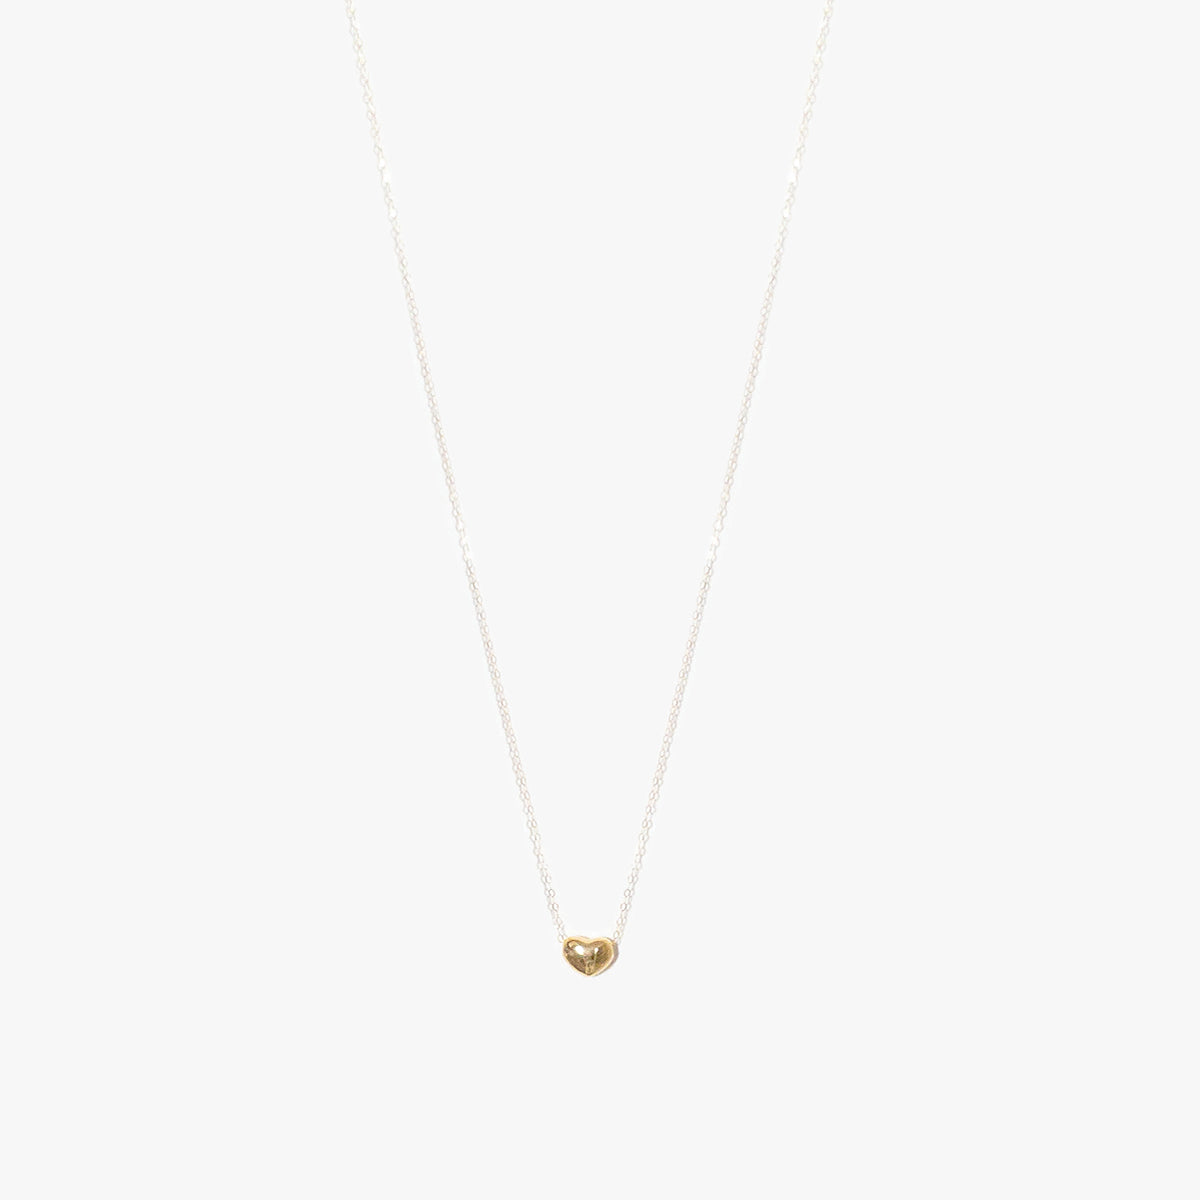 The Ultra Thin Heart Necklace in Solid Gold